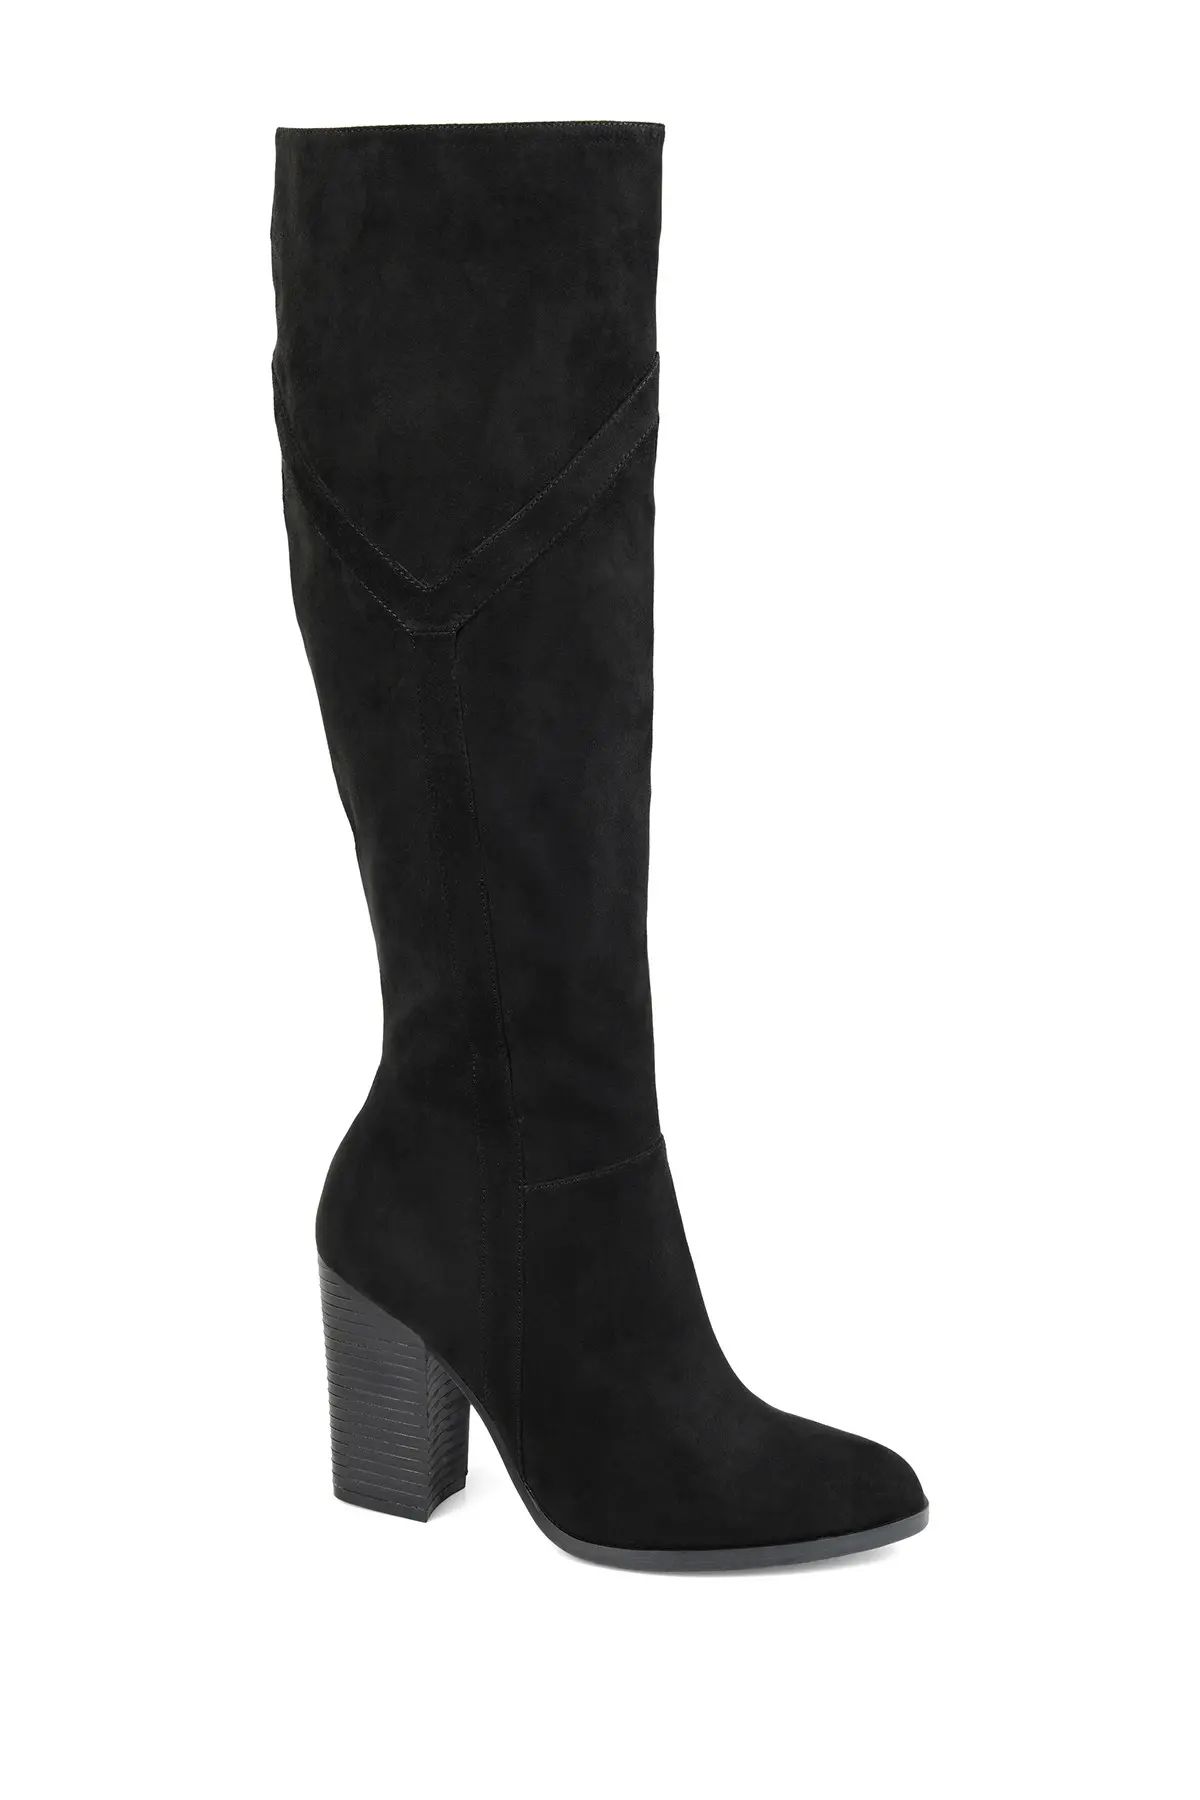 JOURNEE Collection Kyllie Tall Boot - Wide Calf at Nordstrom Rack | Nordstrom Rack